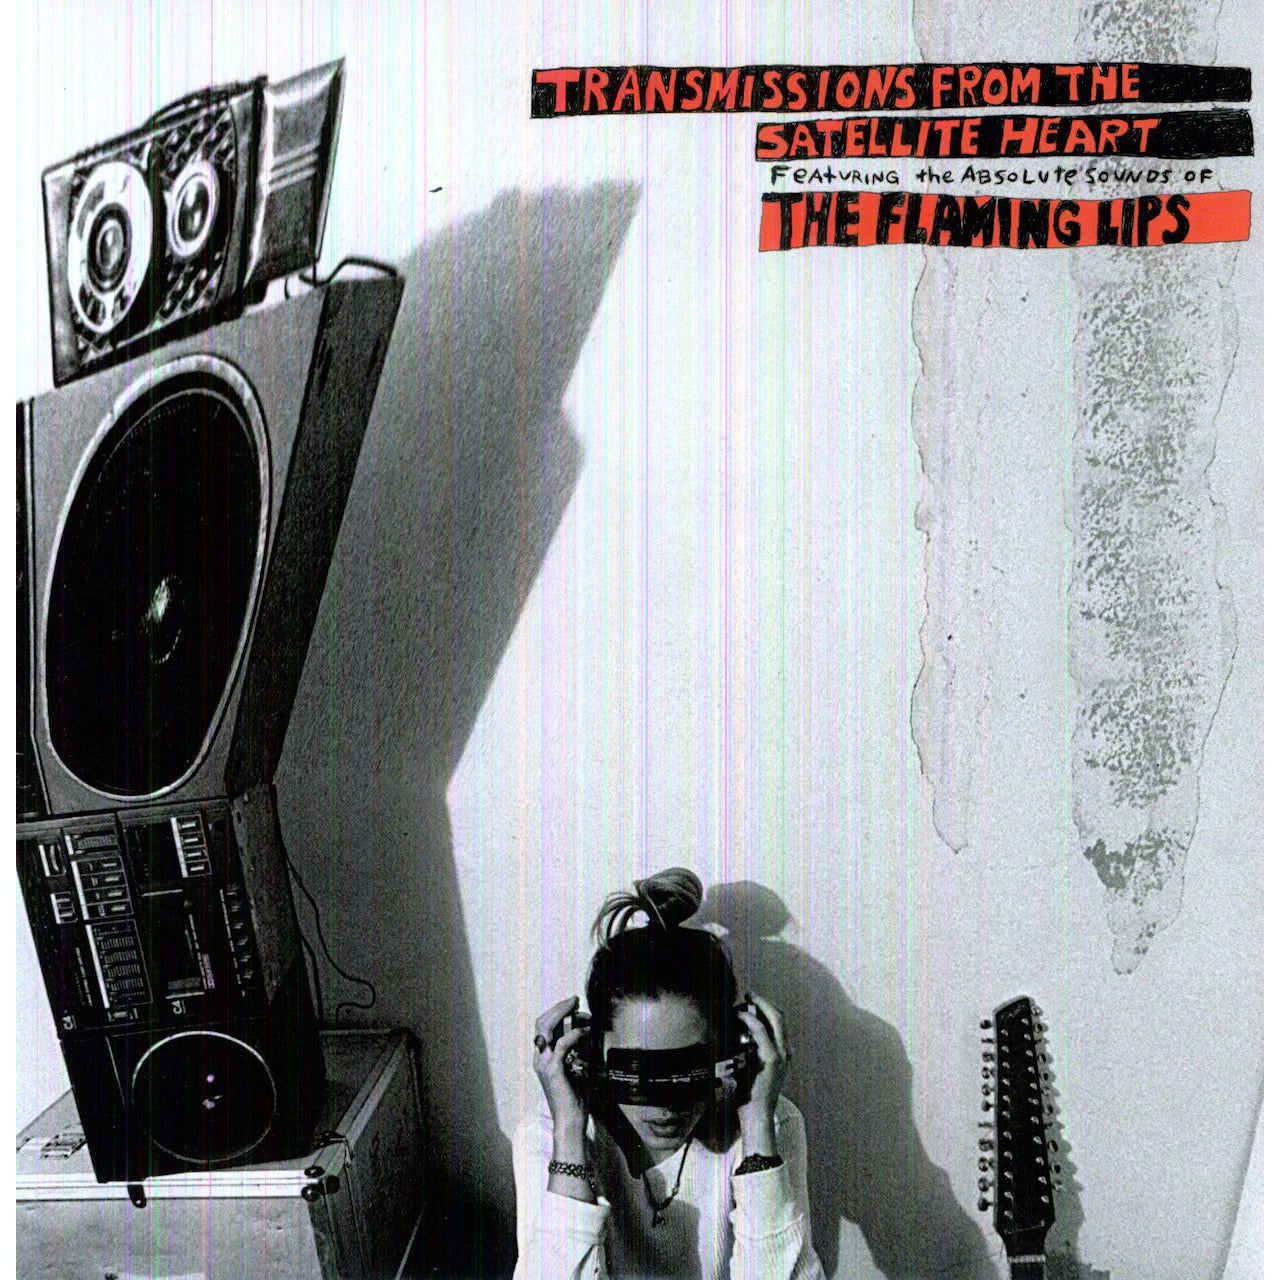 The Flaming Lips - Transmissions From The Satellite Heart [Vinyl LP]